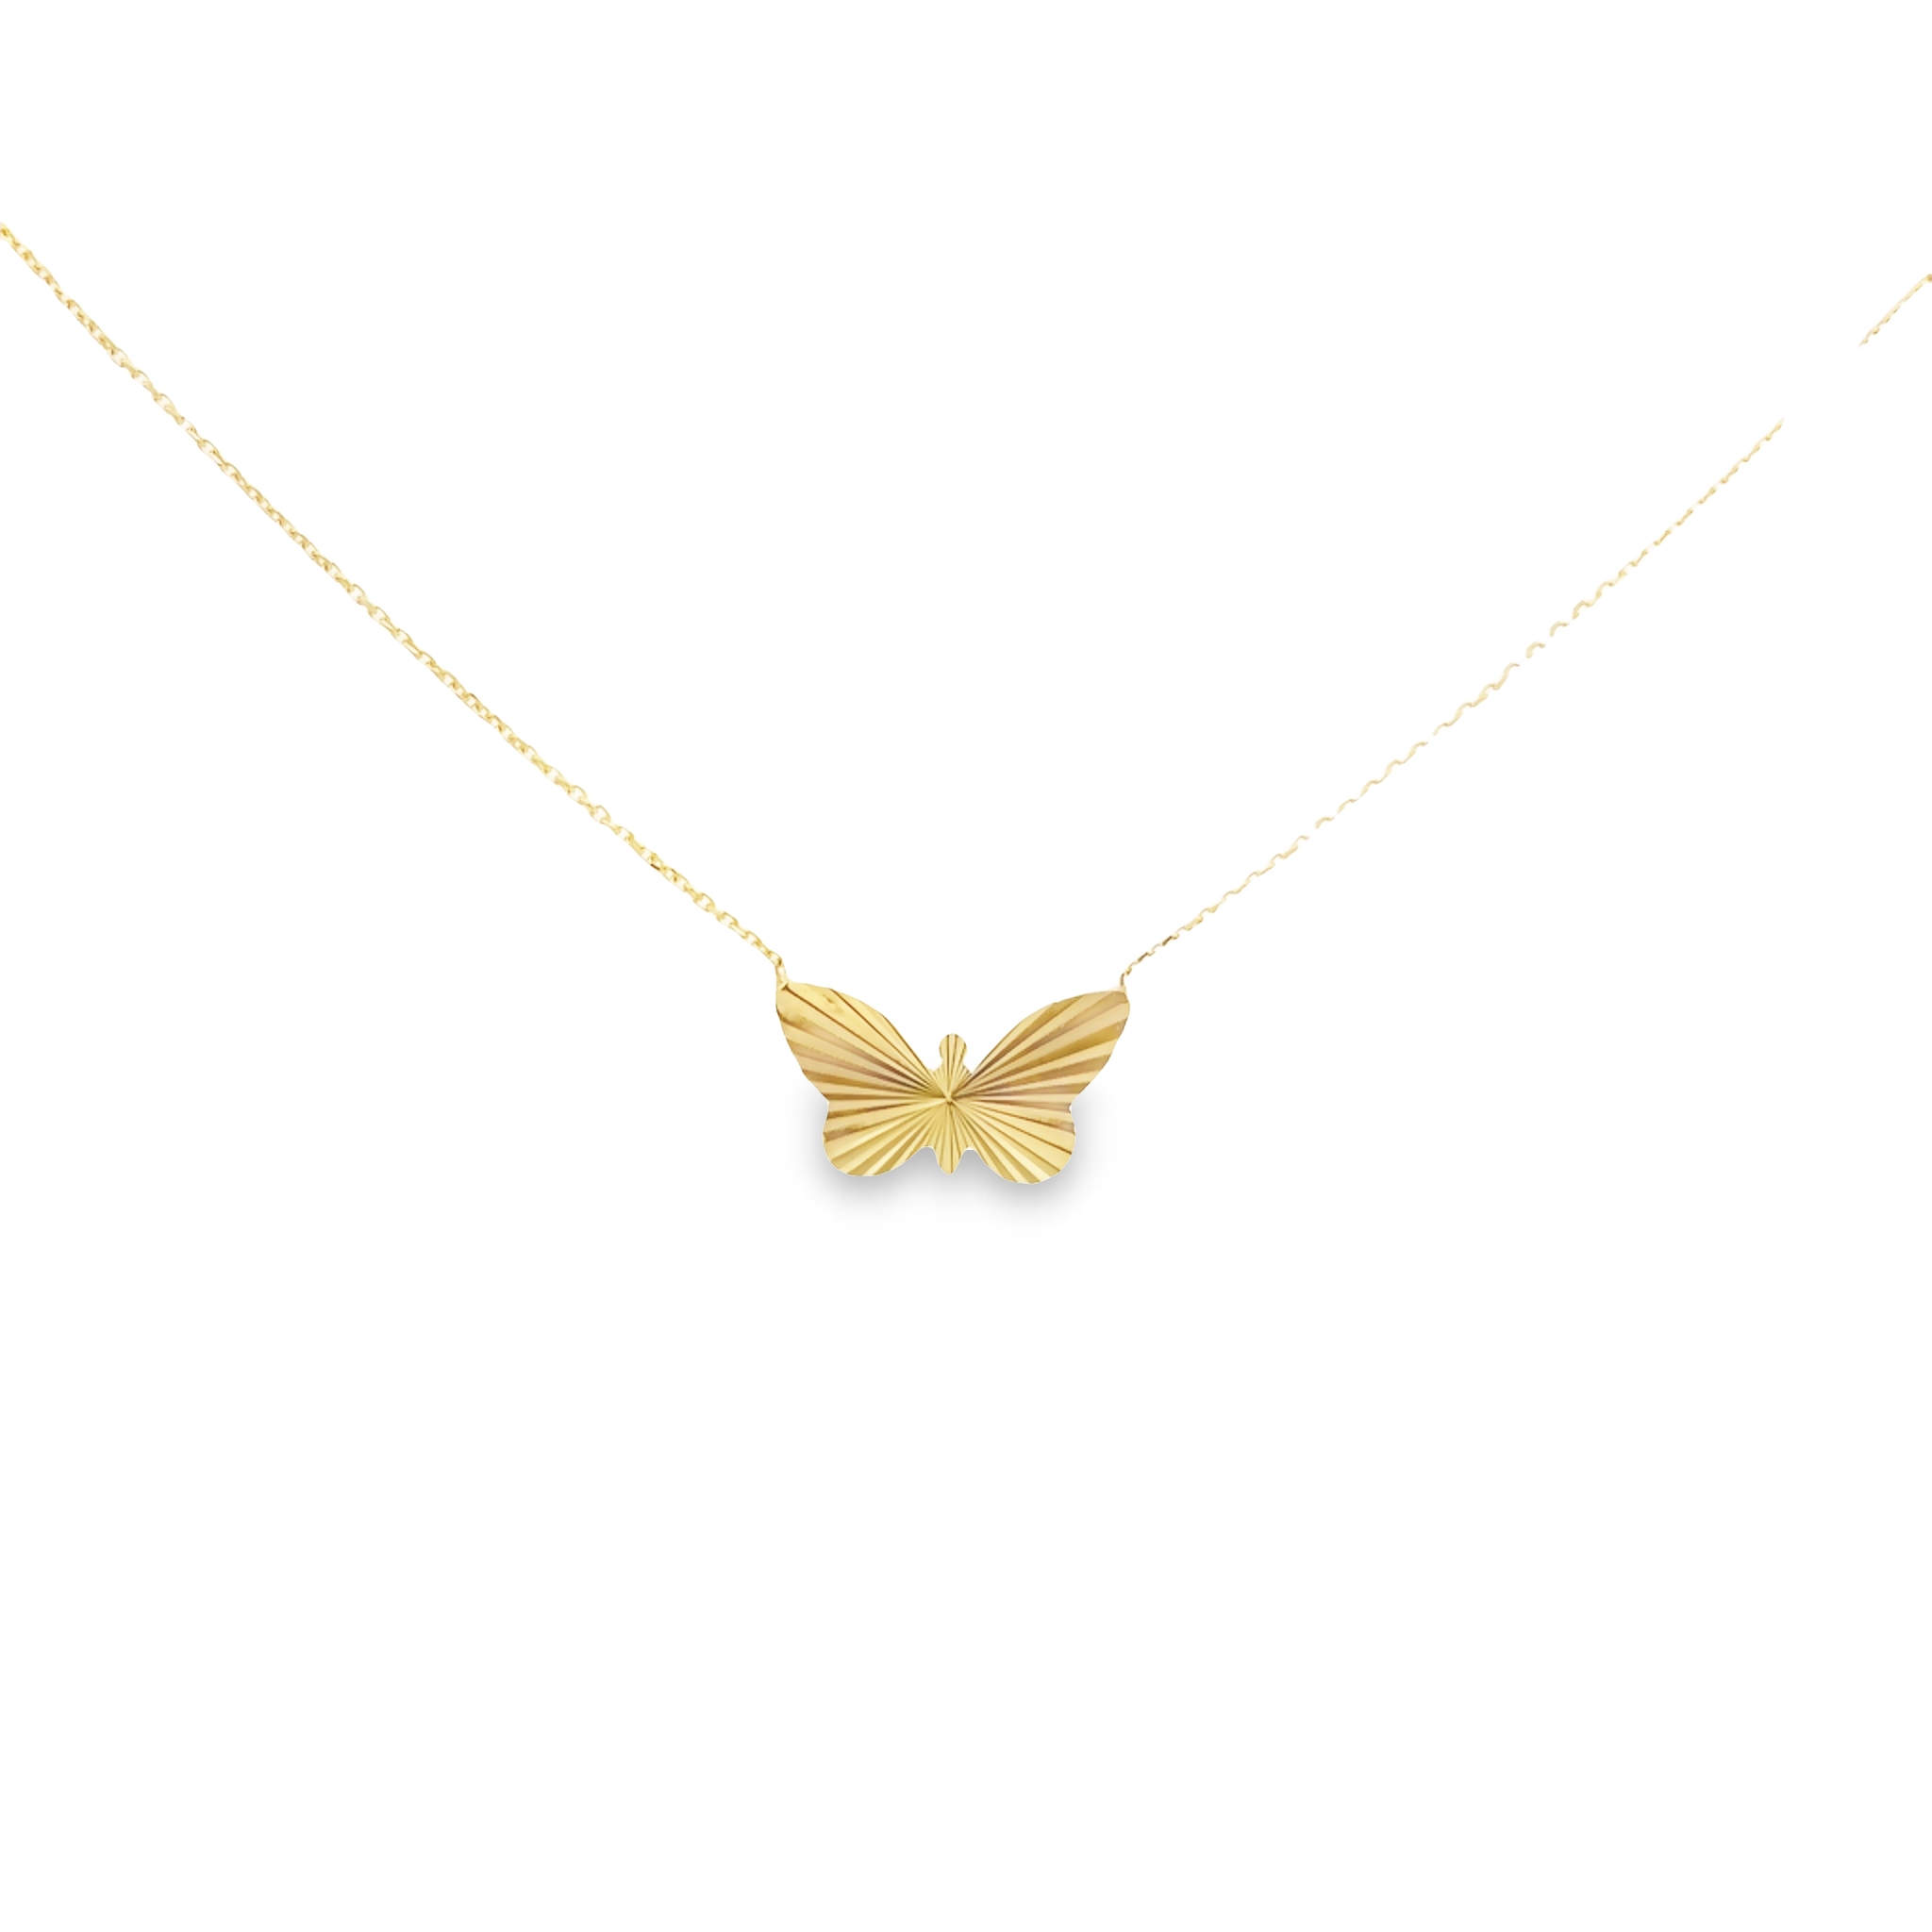 14 karat yellow gold butterfly necklace. Length 18